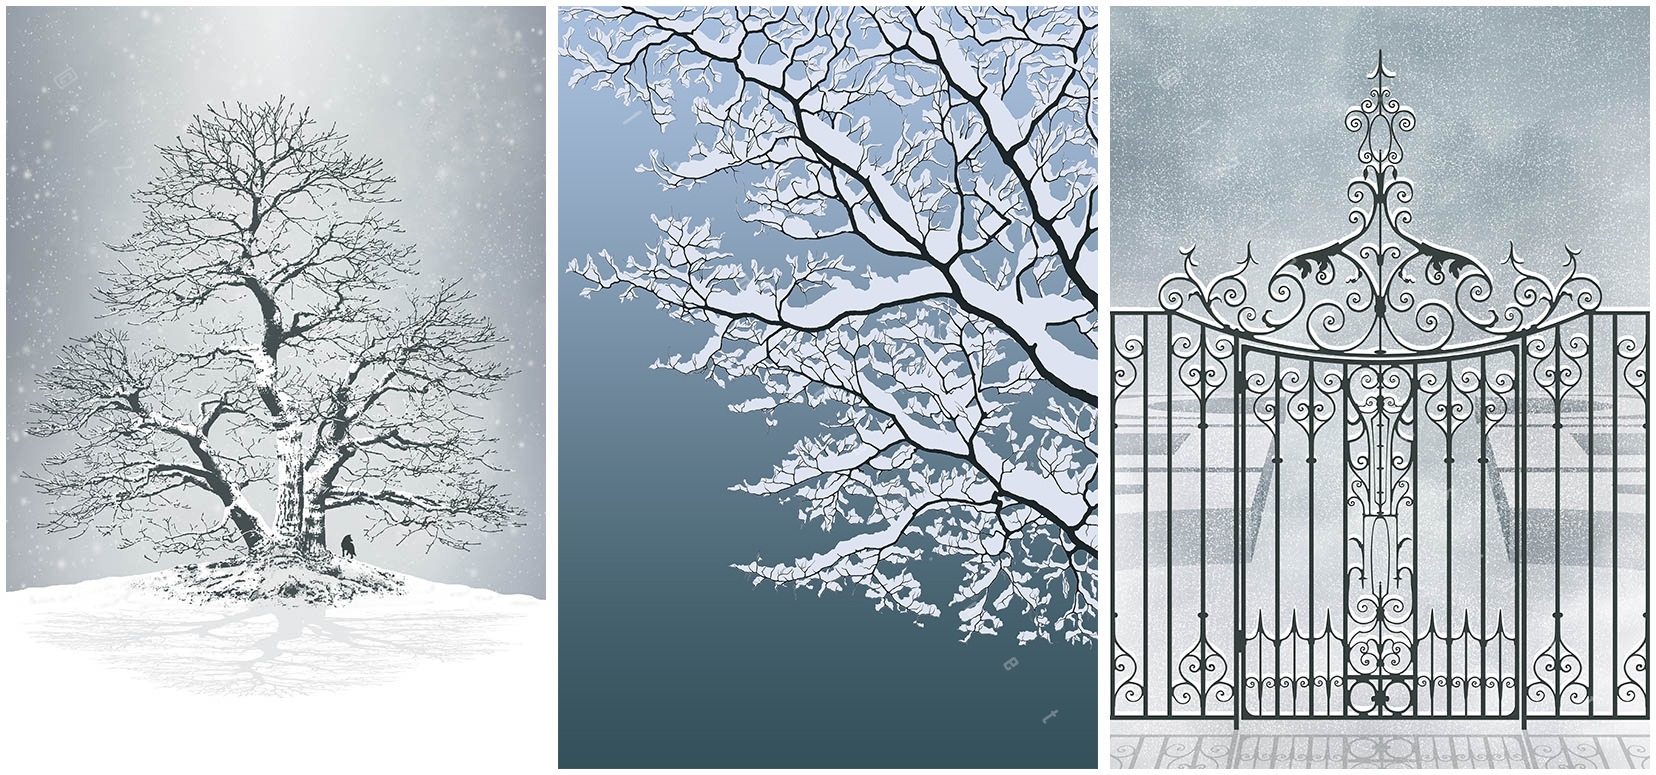 lonely tree standing in winter snow top of the hill with a wolf in silent snowfall snow covered snow laden branches blue sky wind still garden gate wrought iron hedges